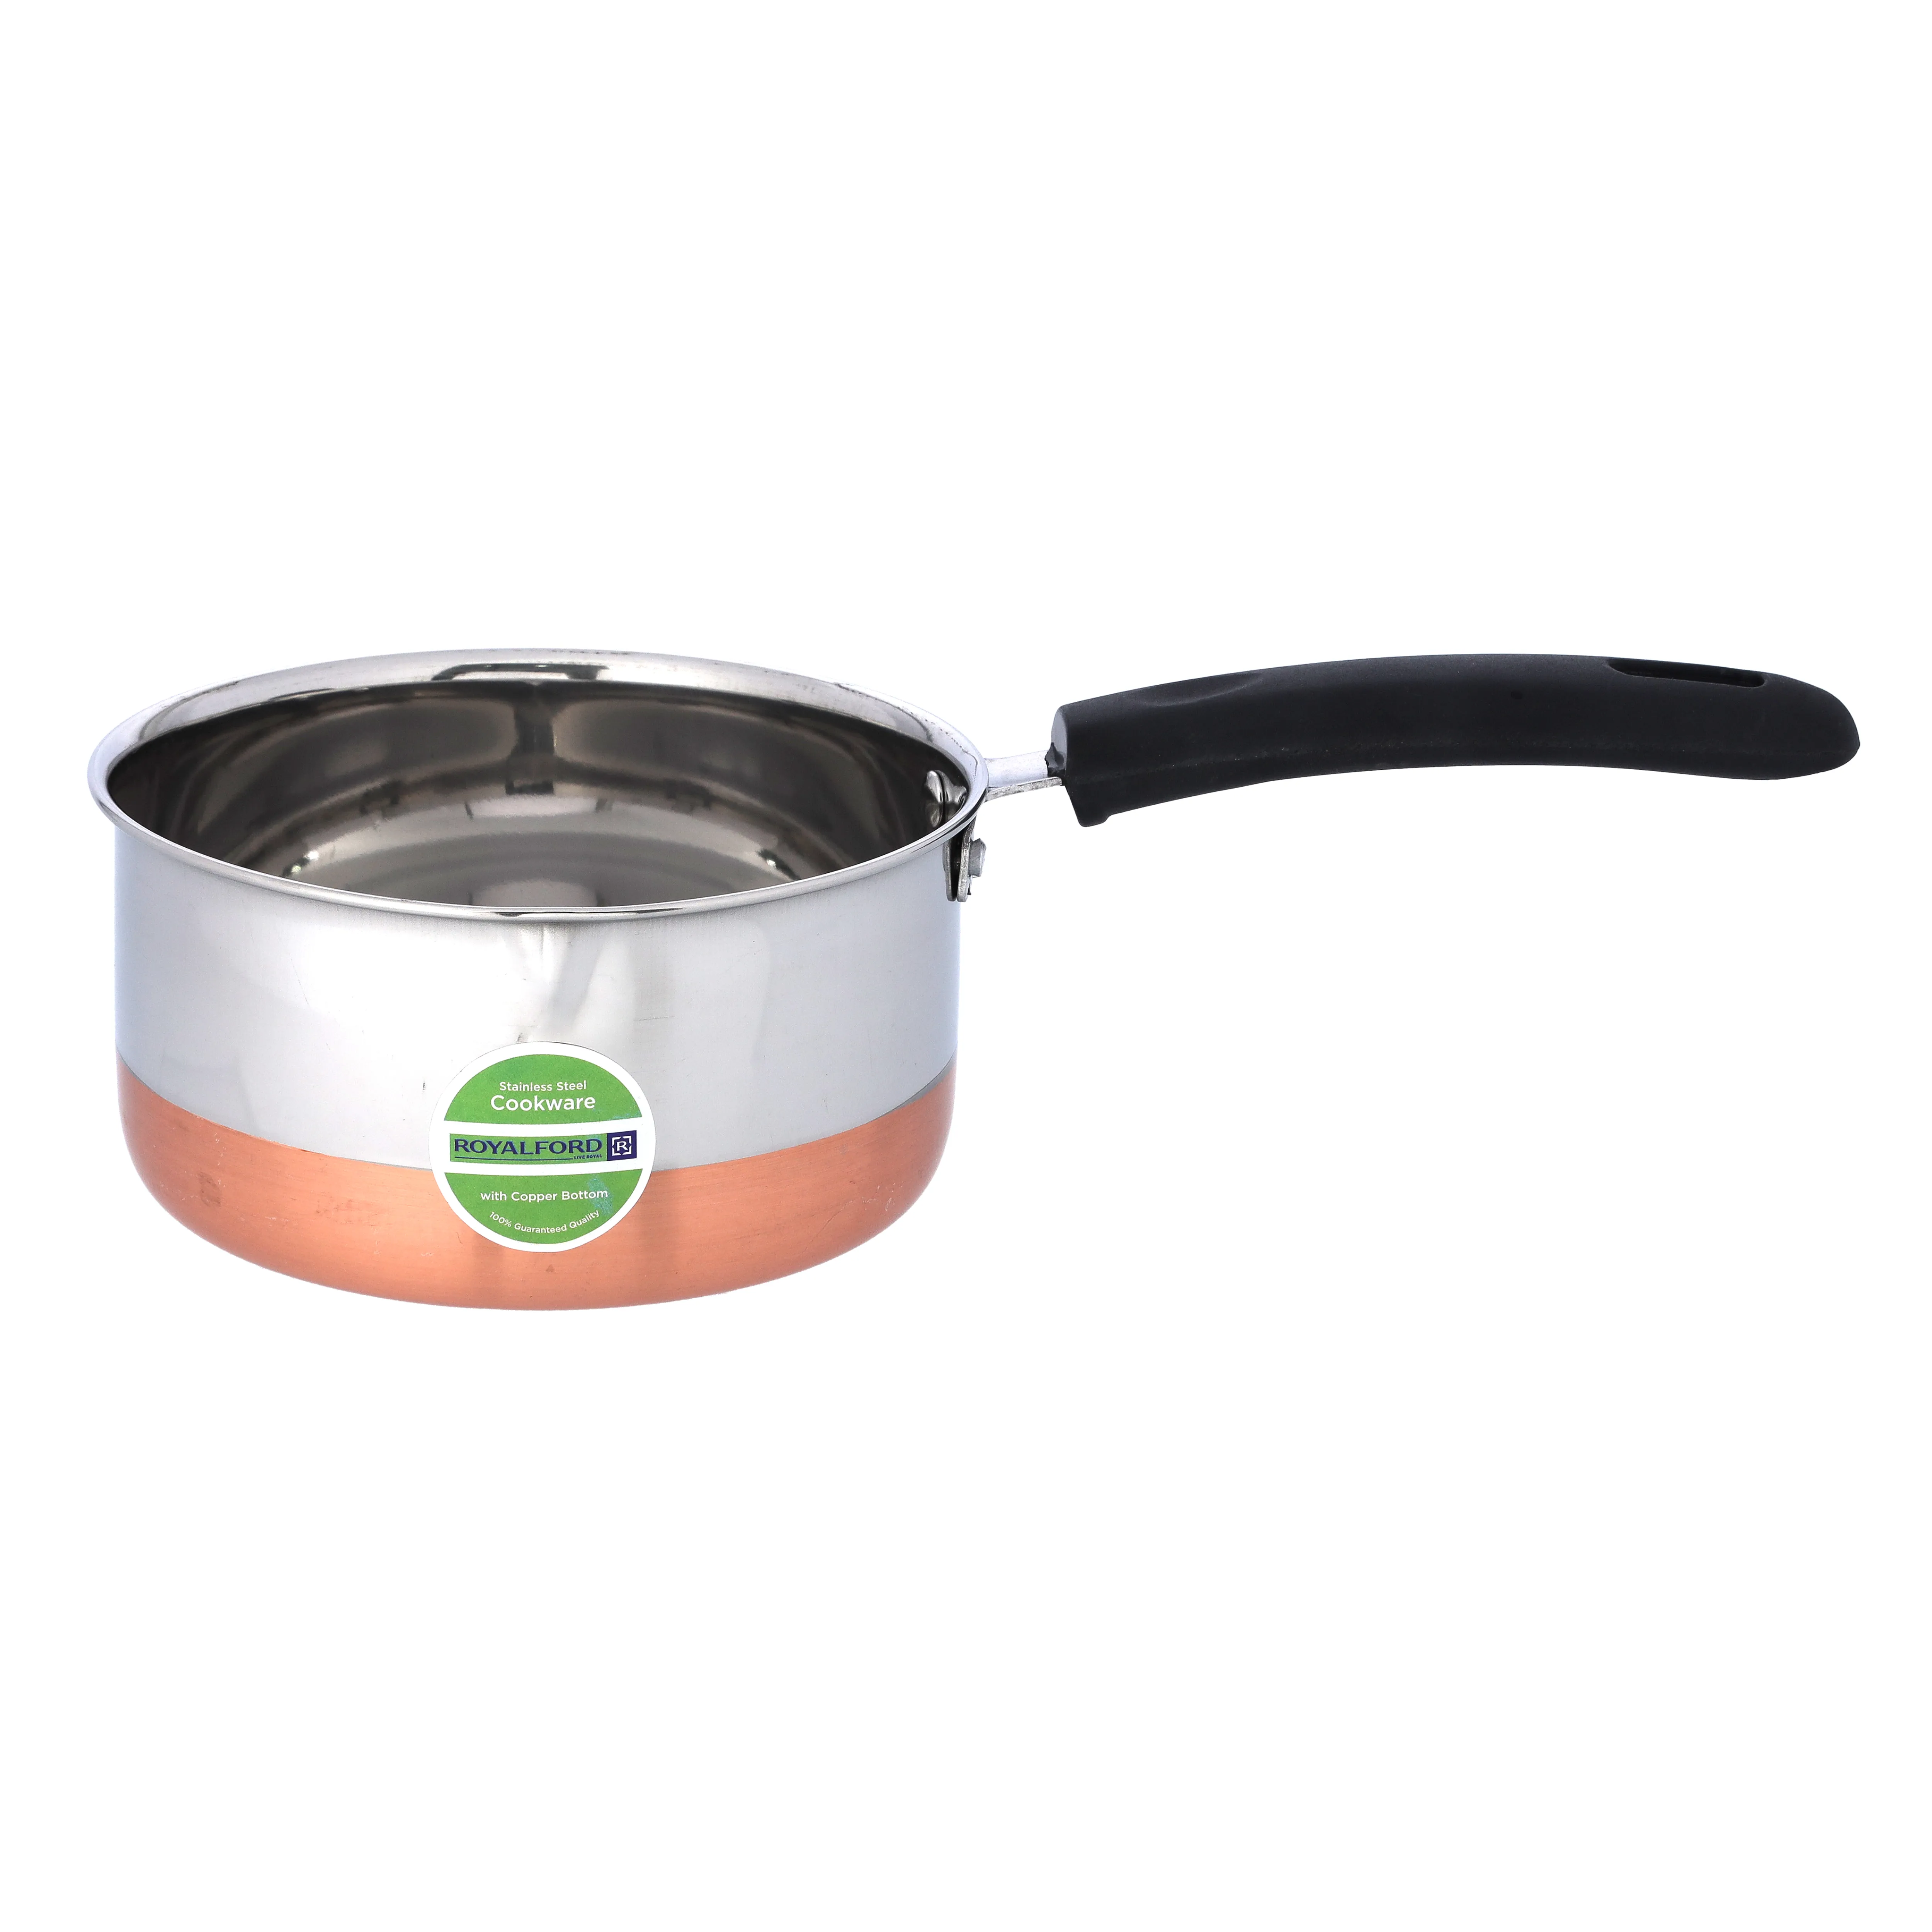 Royalford  Saucepan 17 CM - Stainless Steel with Copper Base - Comfortable Handle with Hanging Loop High Temperature Resistant Pouring Lip Ideal for Milk, Melting Butter, Boiling Eggs & More